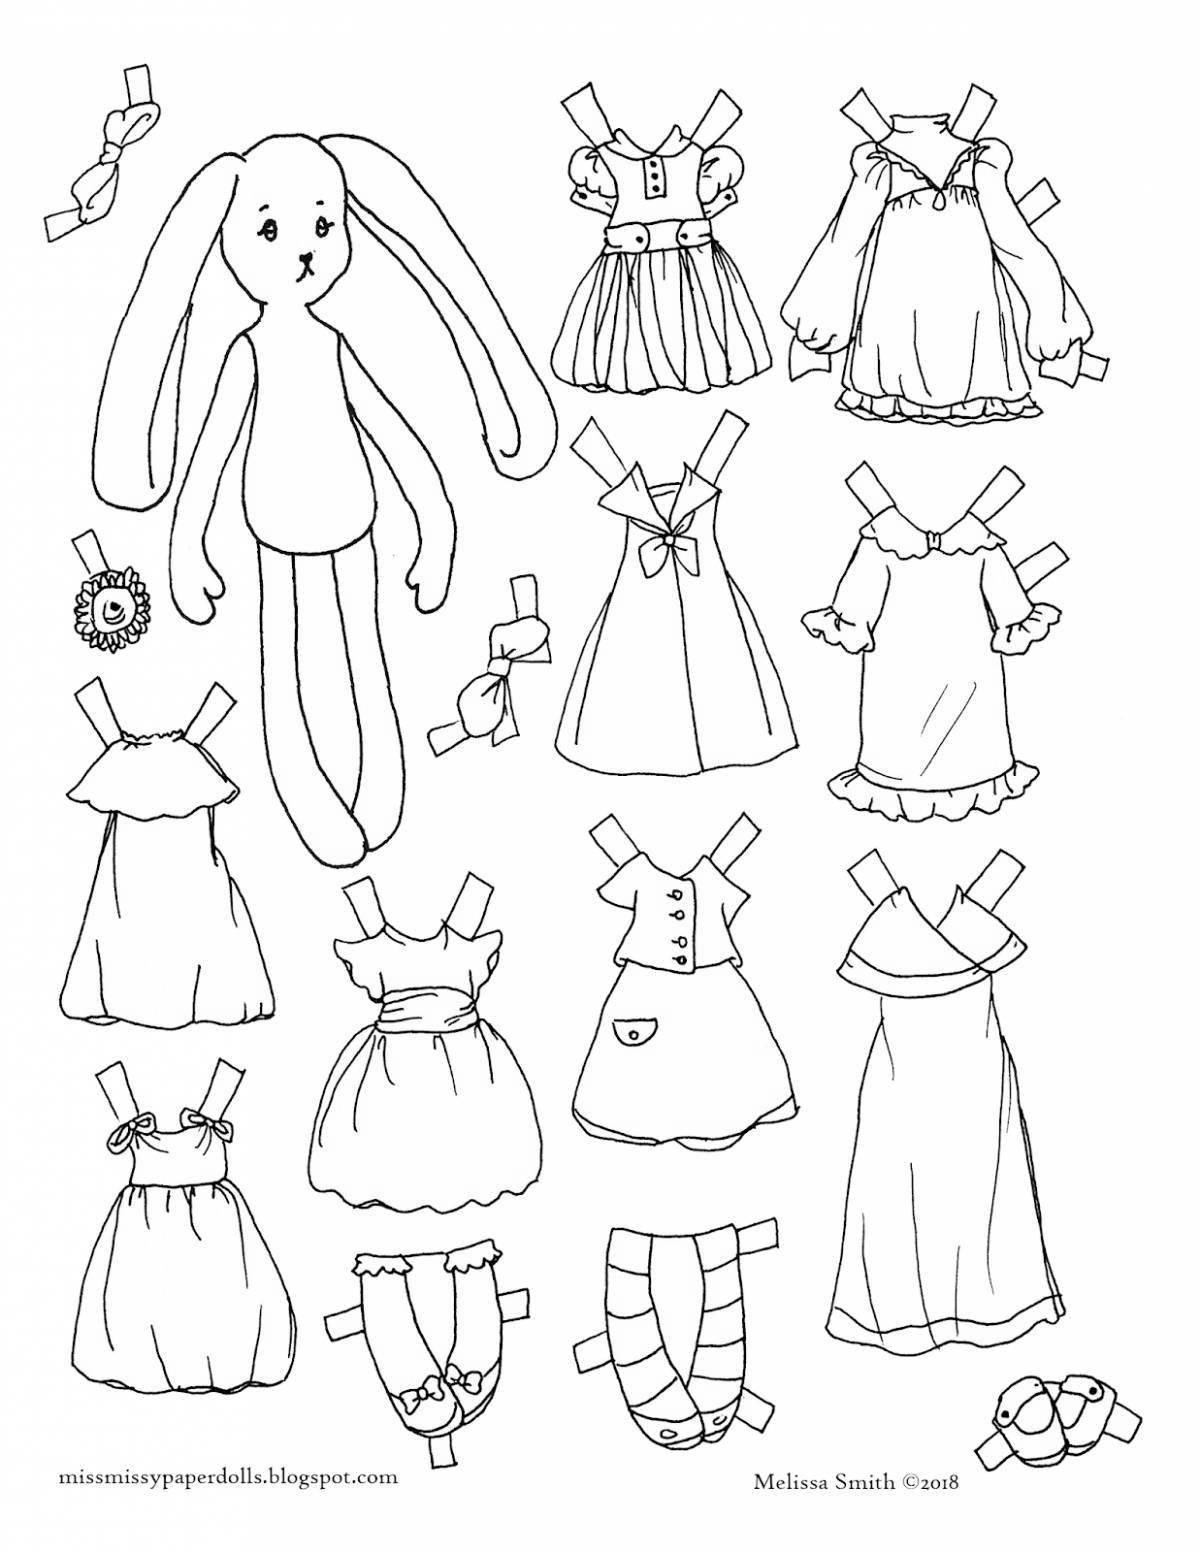 Cute bunny doll coloring